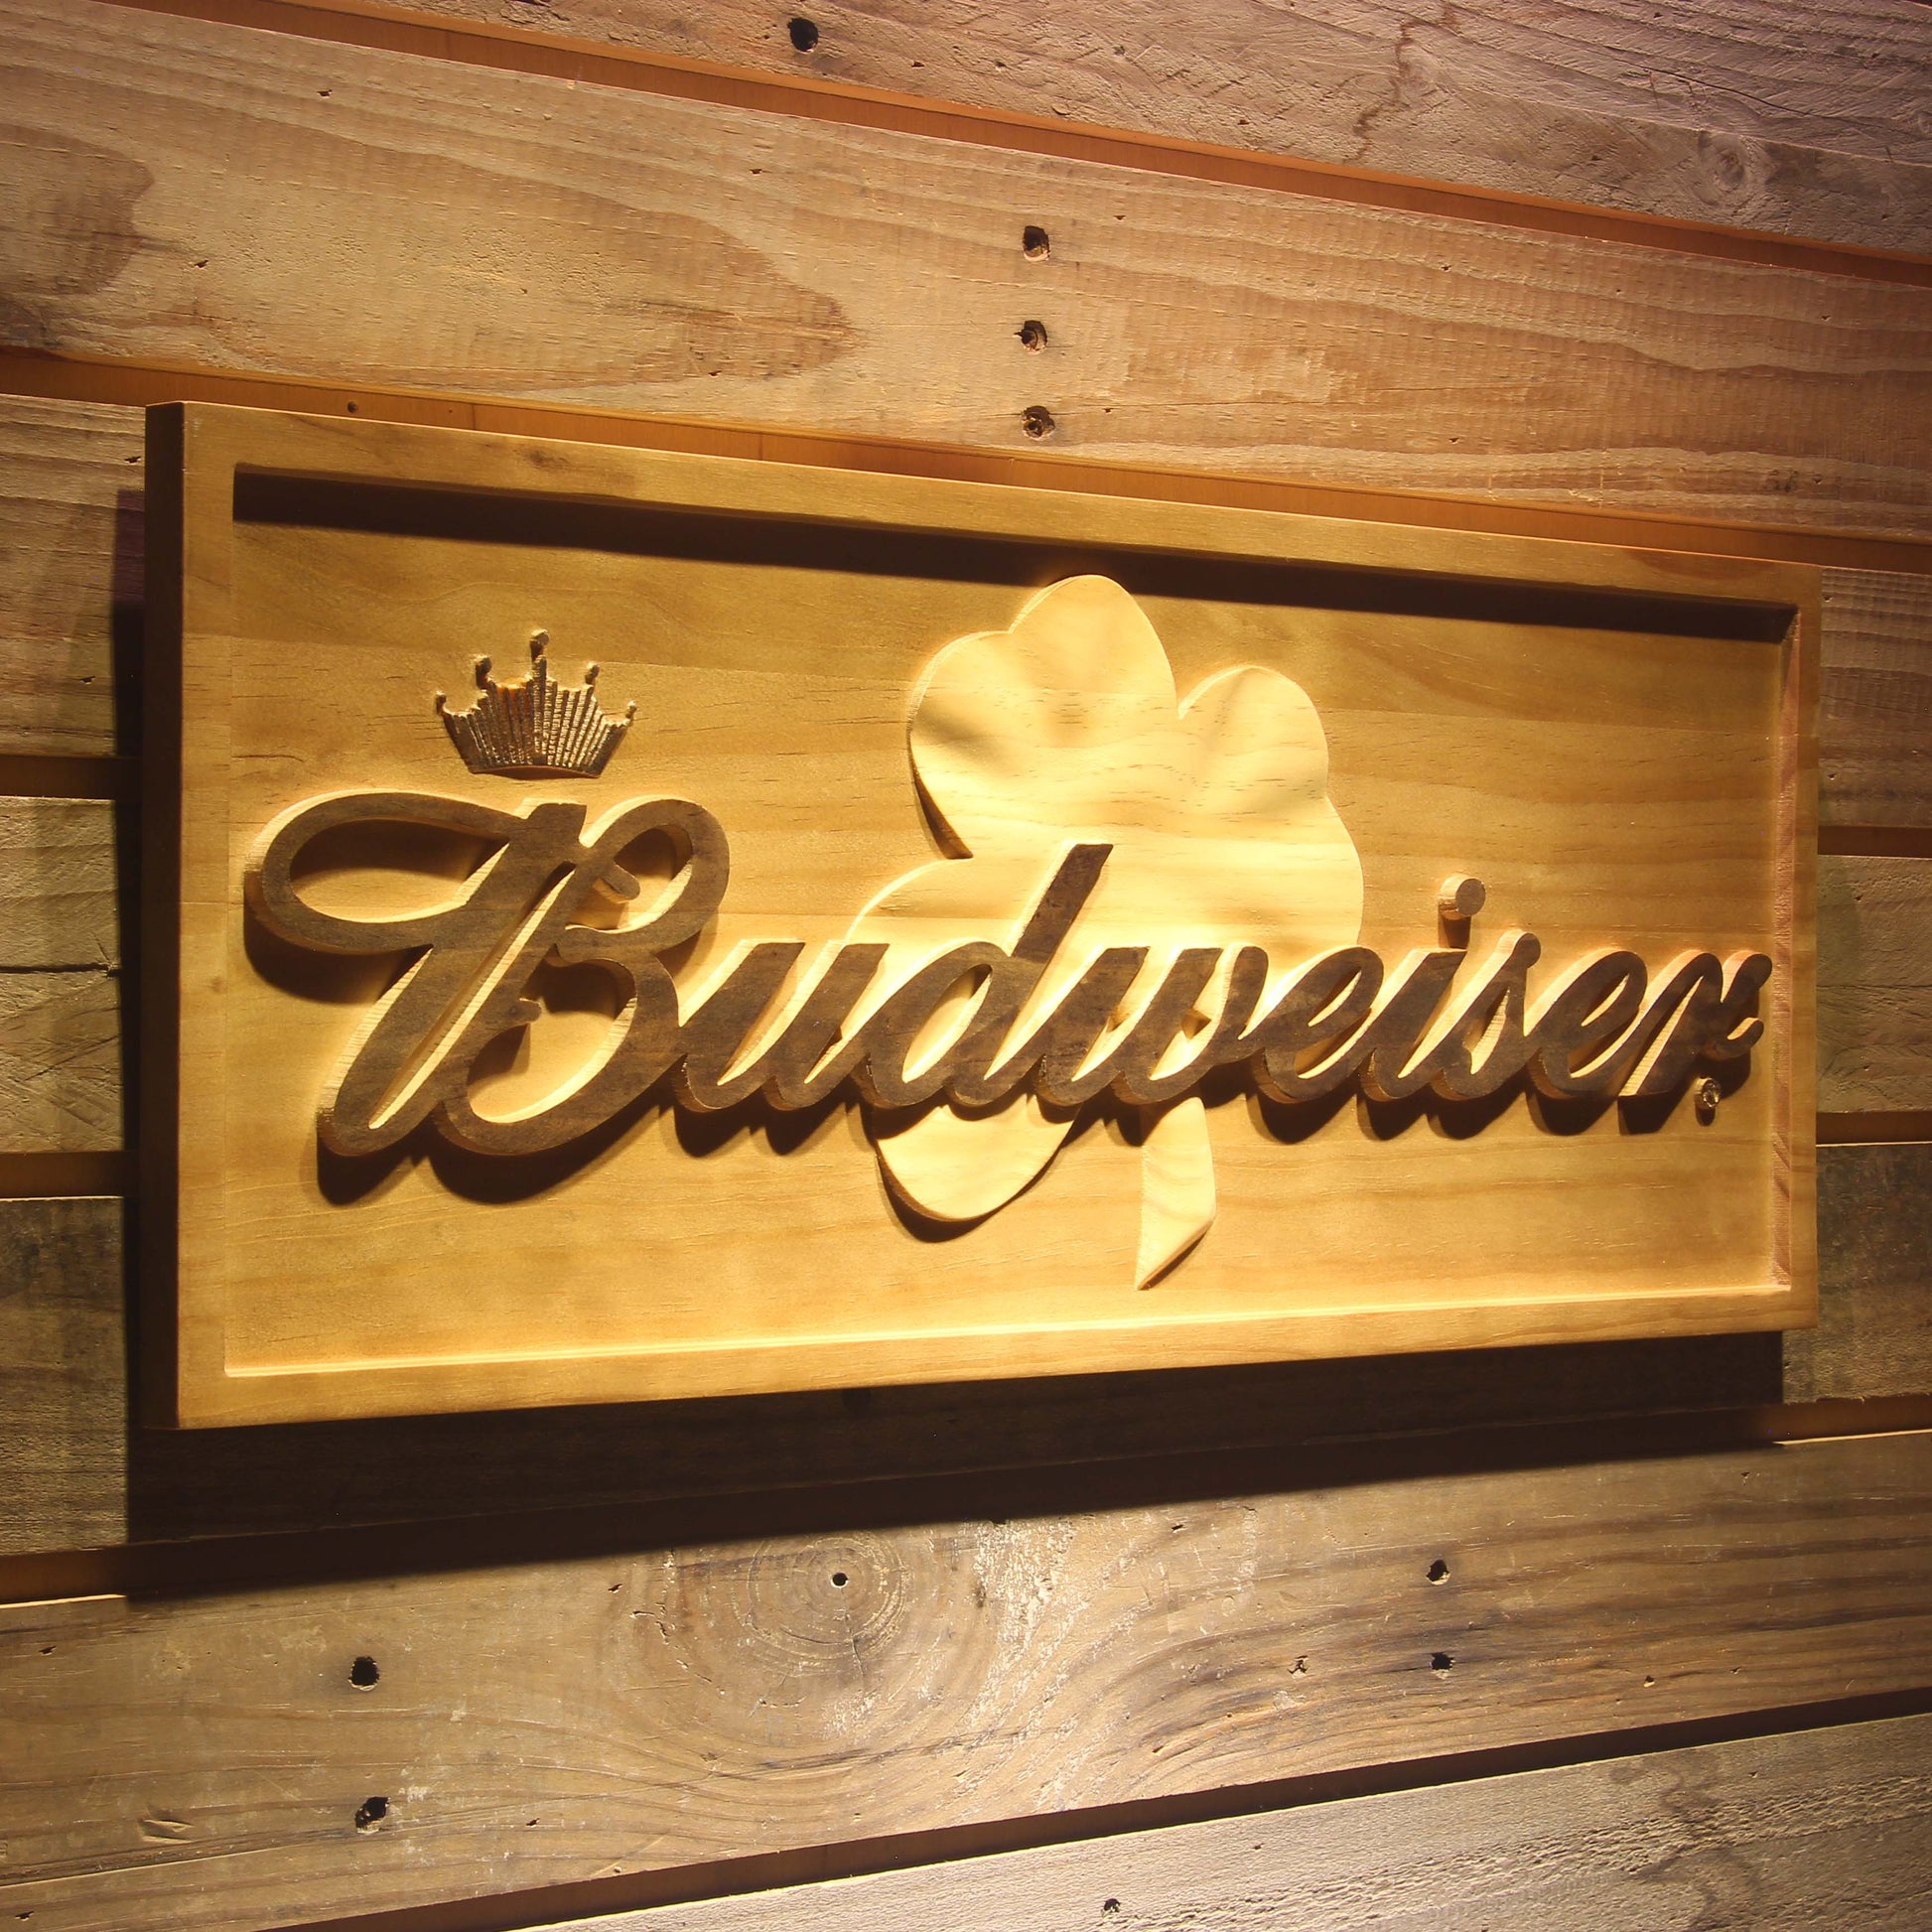 Budwesier Shamrock  3D Wooden Bar Signs by Woody Signs Co. - Handmade Crafted Unique Wooden Creative